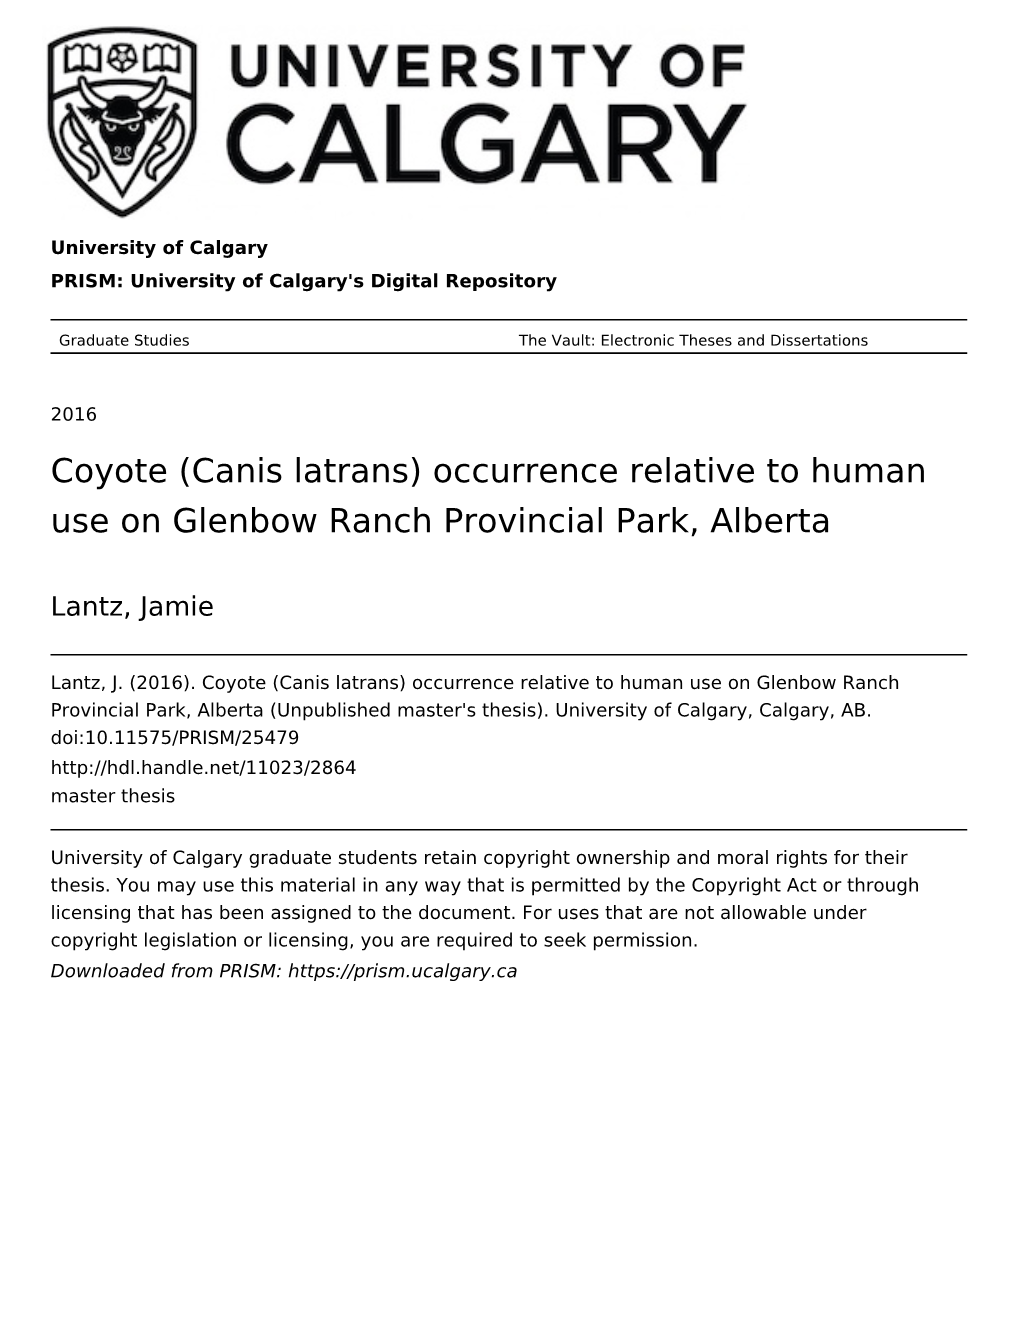 Coyote (Canis Latrans) Occurrence Relative to Human Use on Glenbow Ranch Provincial Park, Alberta